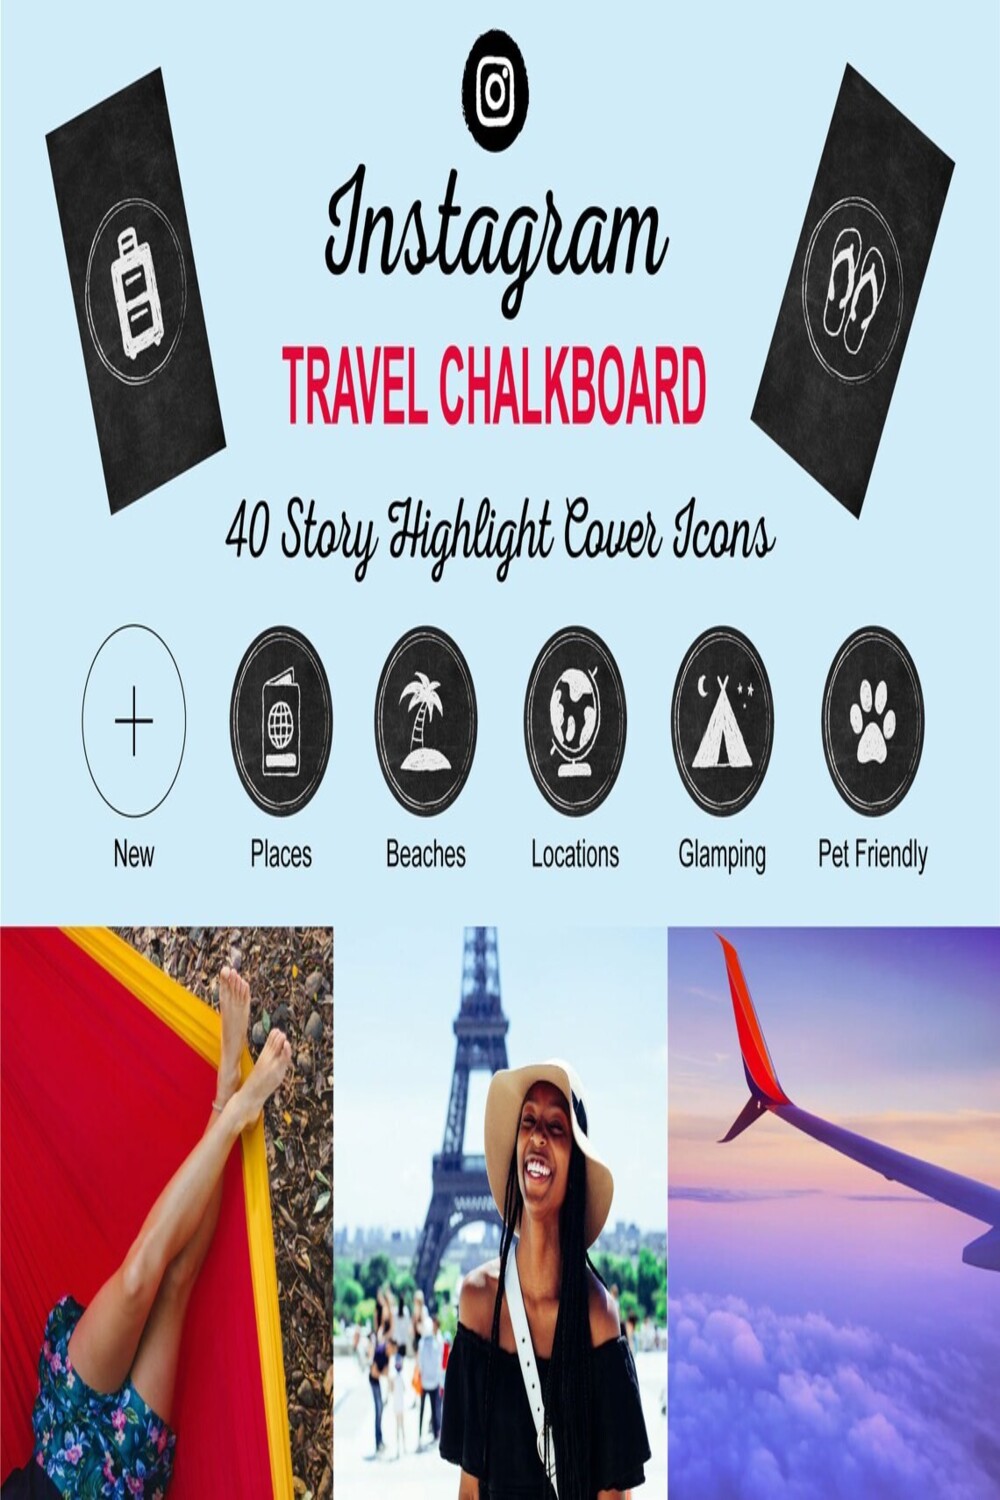 Instagram Travel Chalkboard (40 Story Highlight Covers Icons) pinterest image.